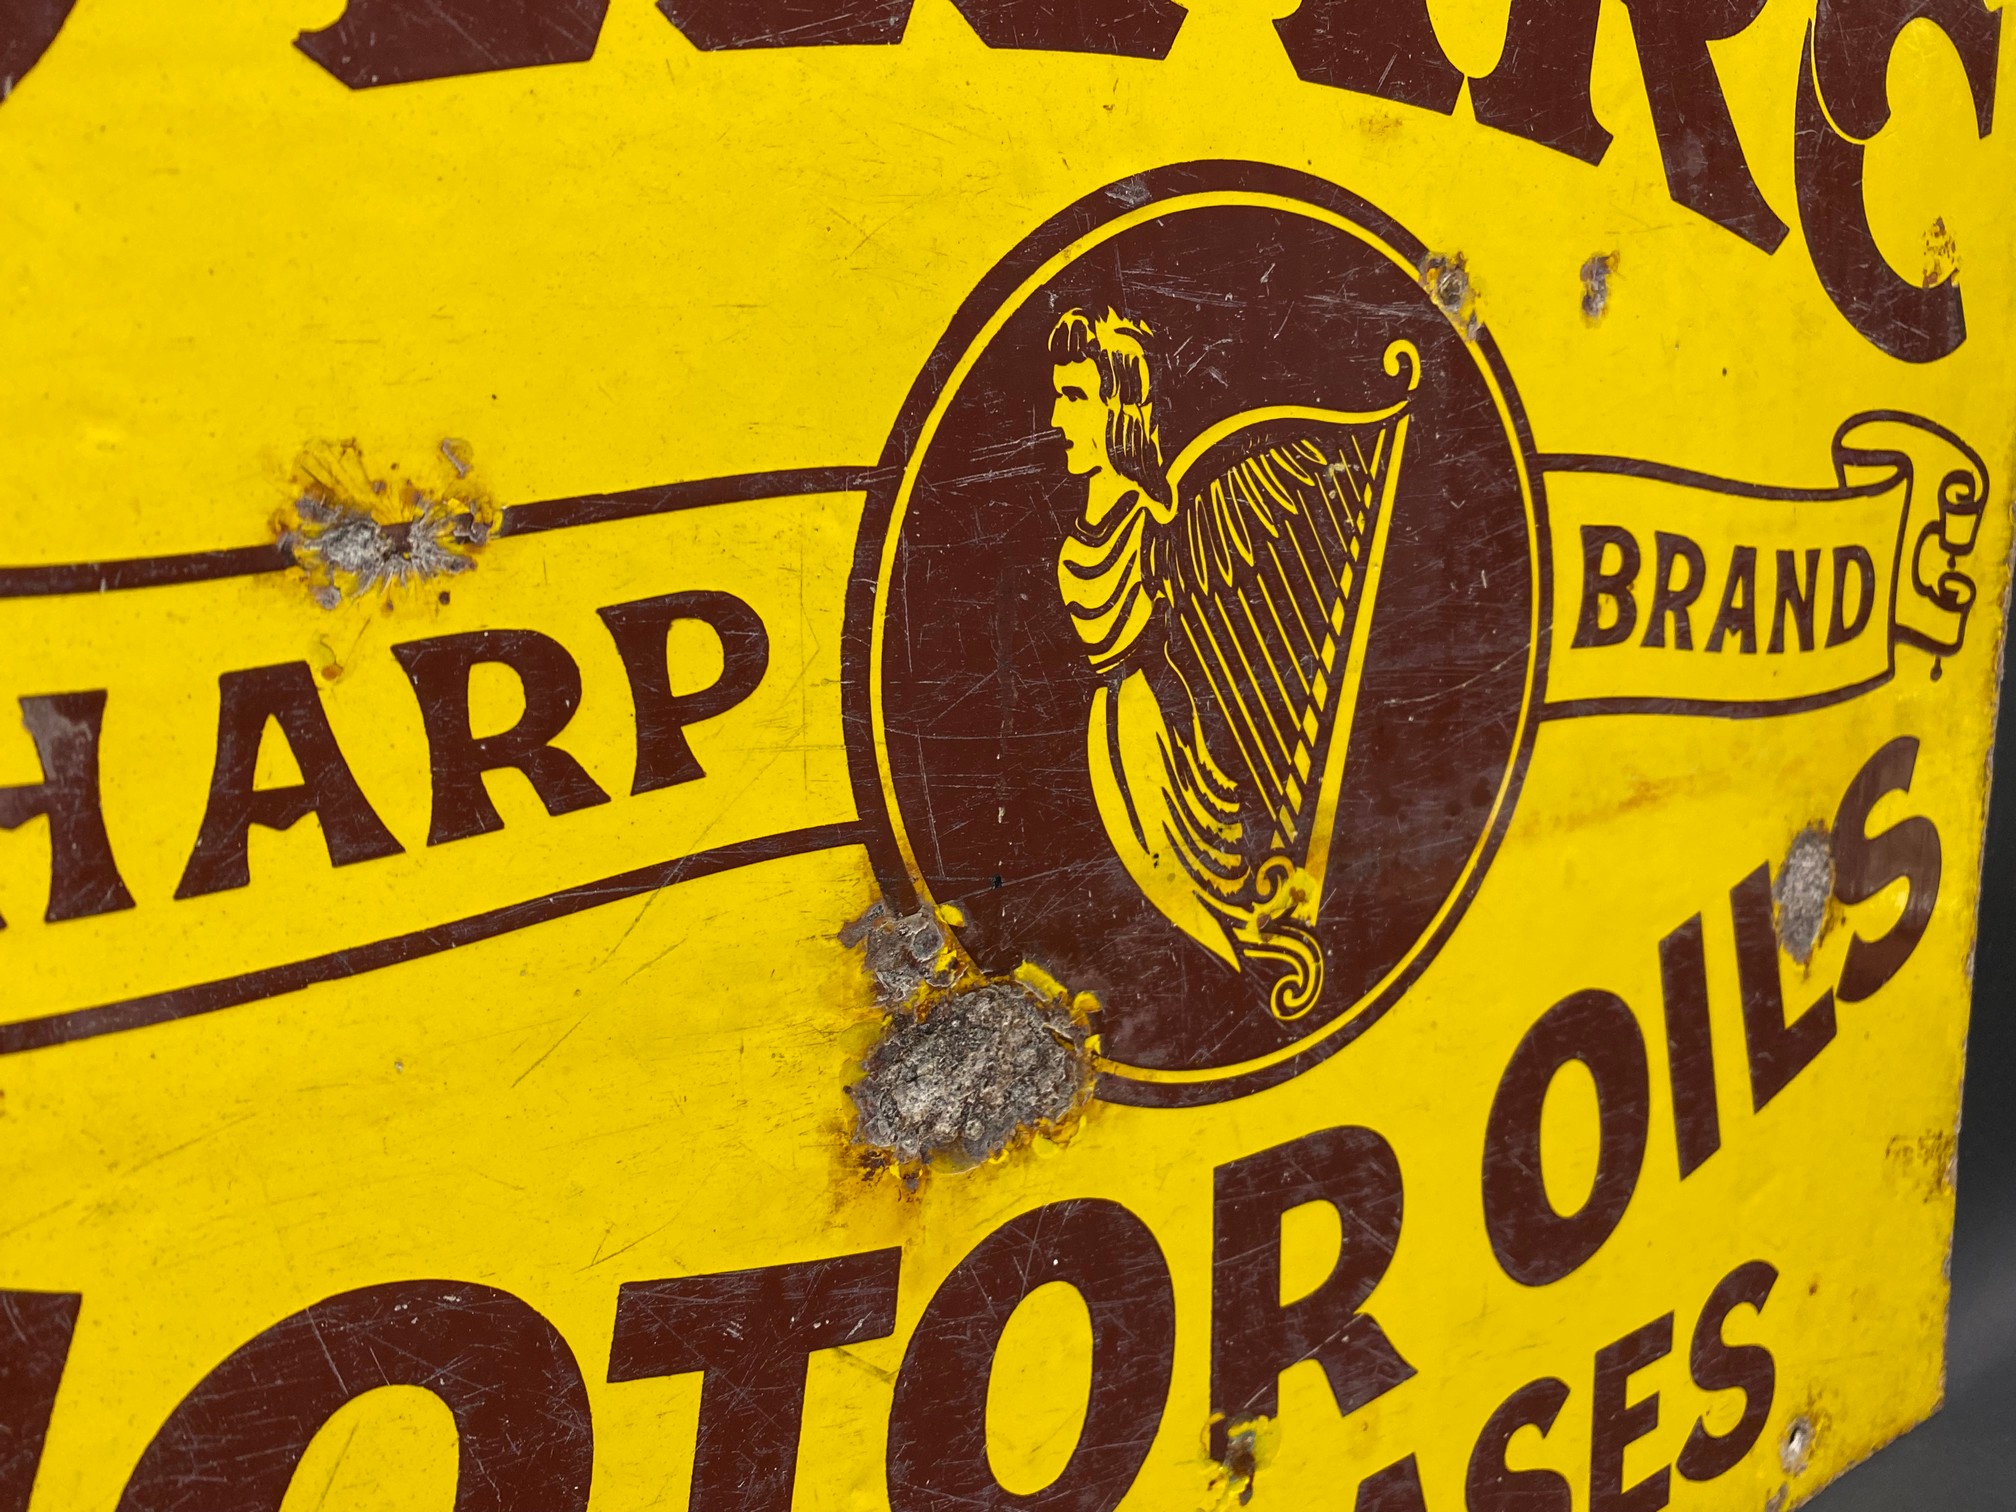 A SWARC Harp Brand Motor Oils and Greases double sided enamel sign, 20 x 16". - Image 3 of 6